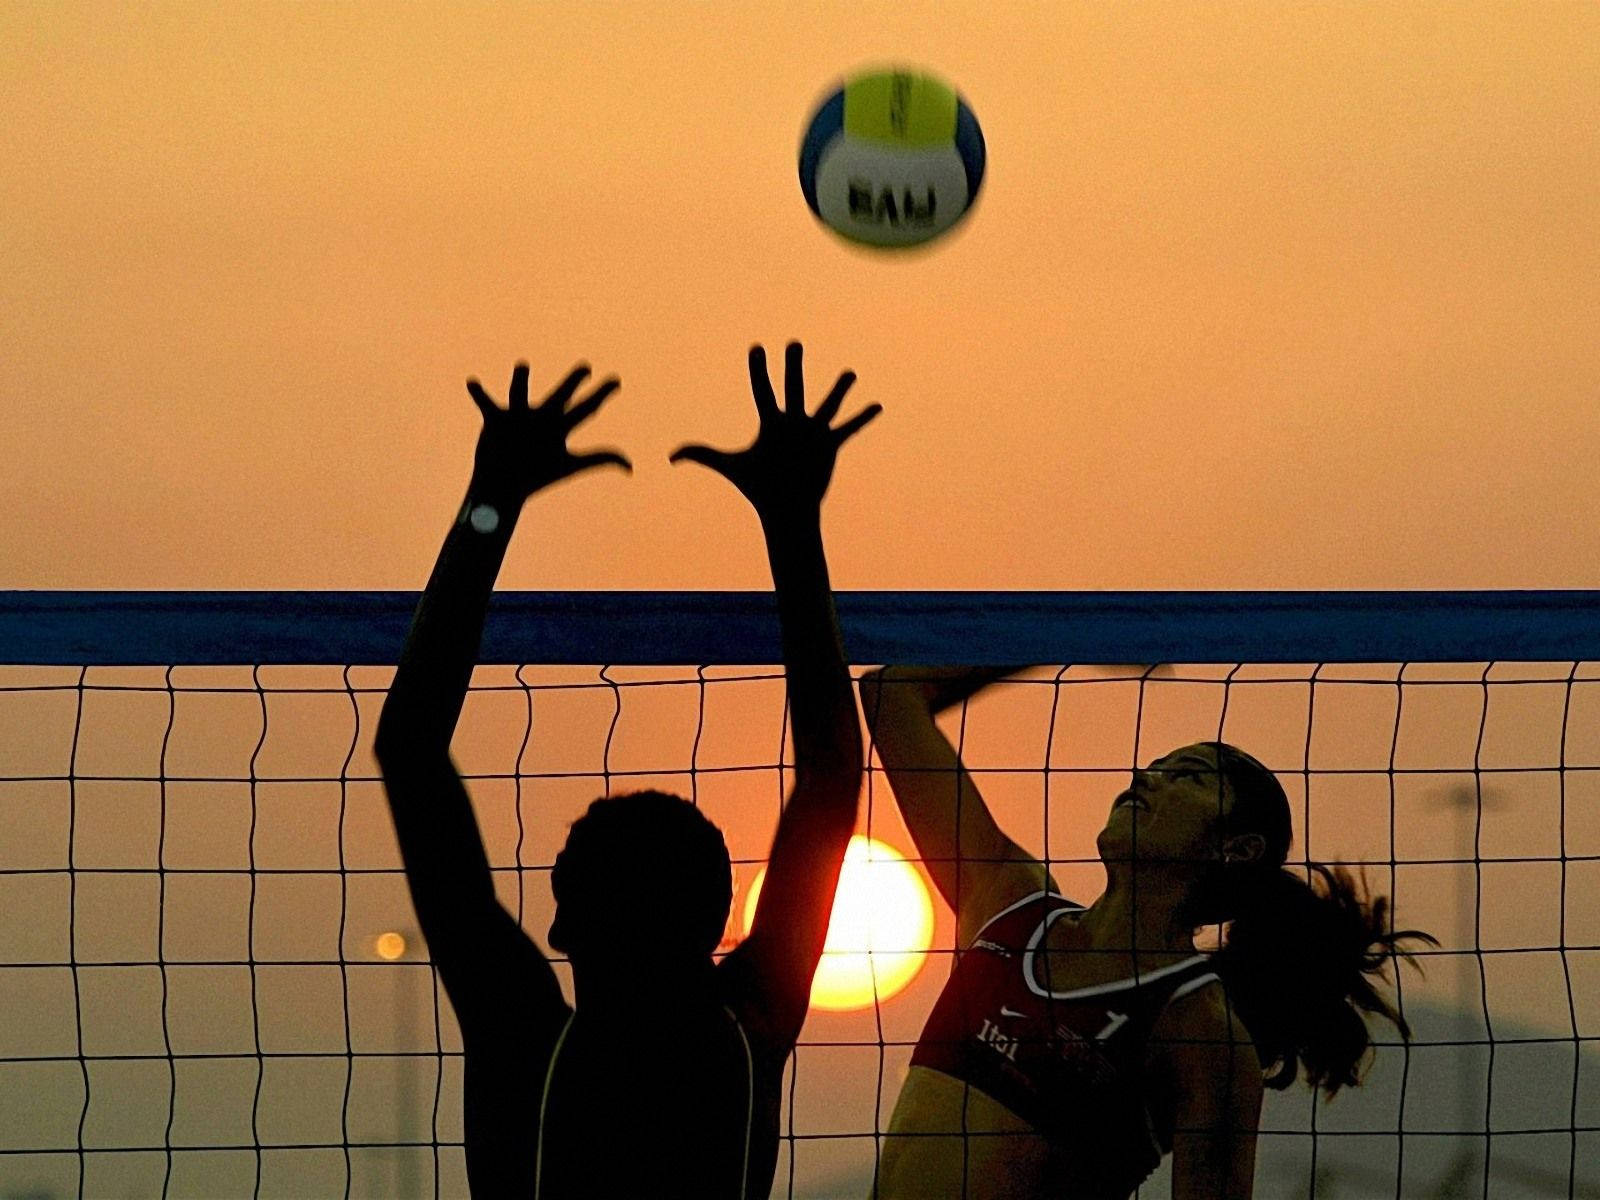 Download Beach Volleyball In Motion Blur At Sunset Wallpaper